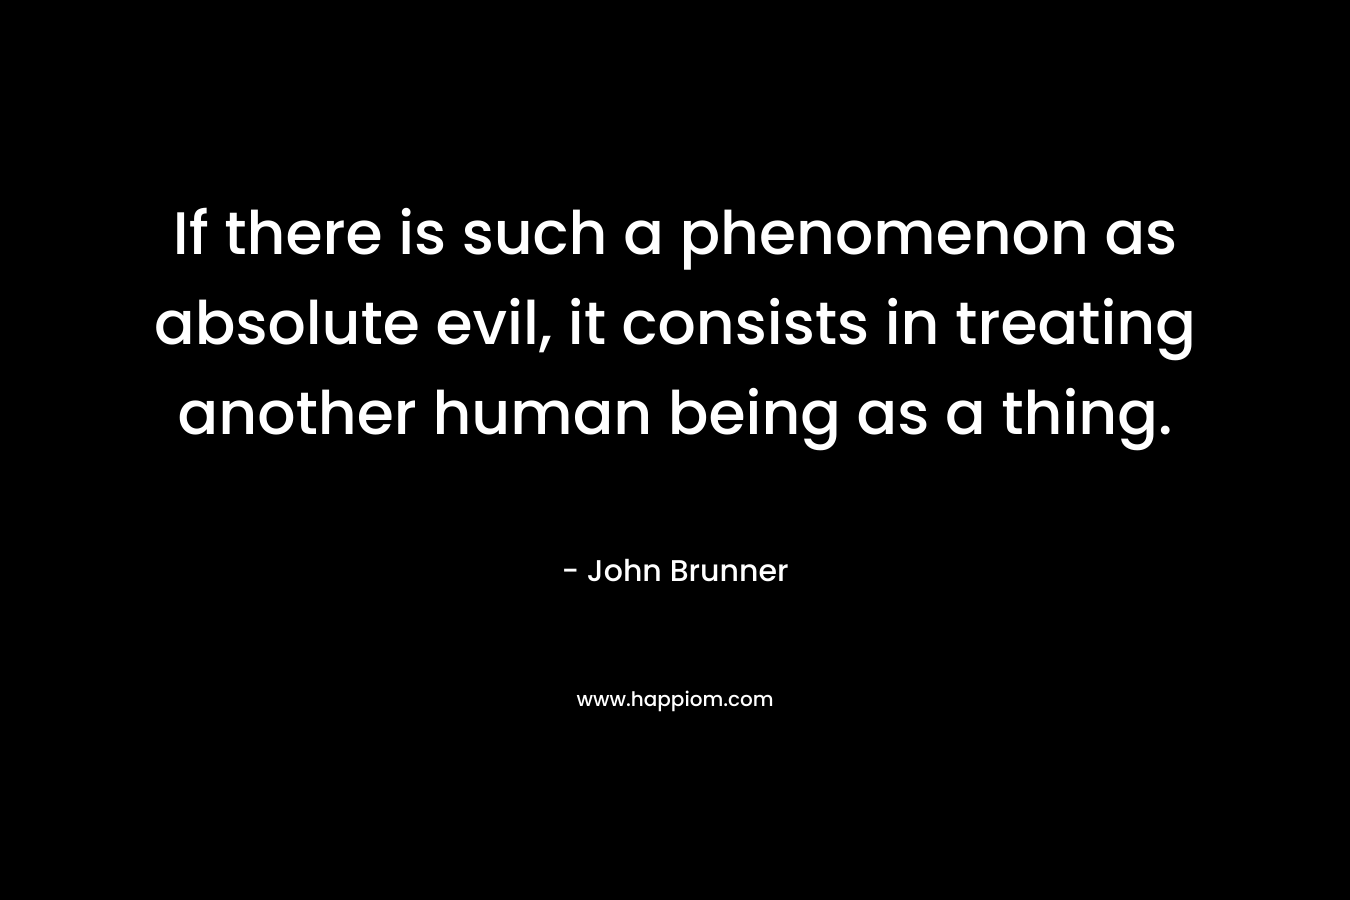 If there is such a phenomenon as absolute evil, it consists in treating another human being as a thing. – John Brunner